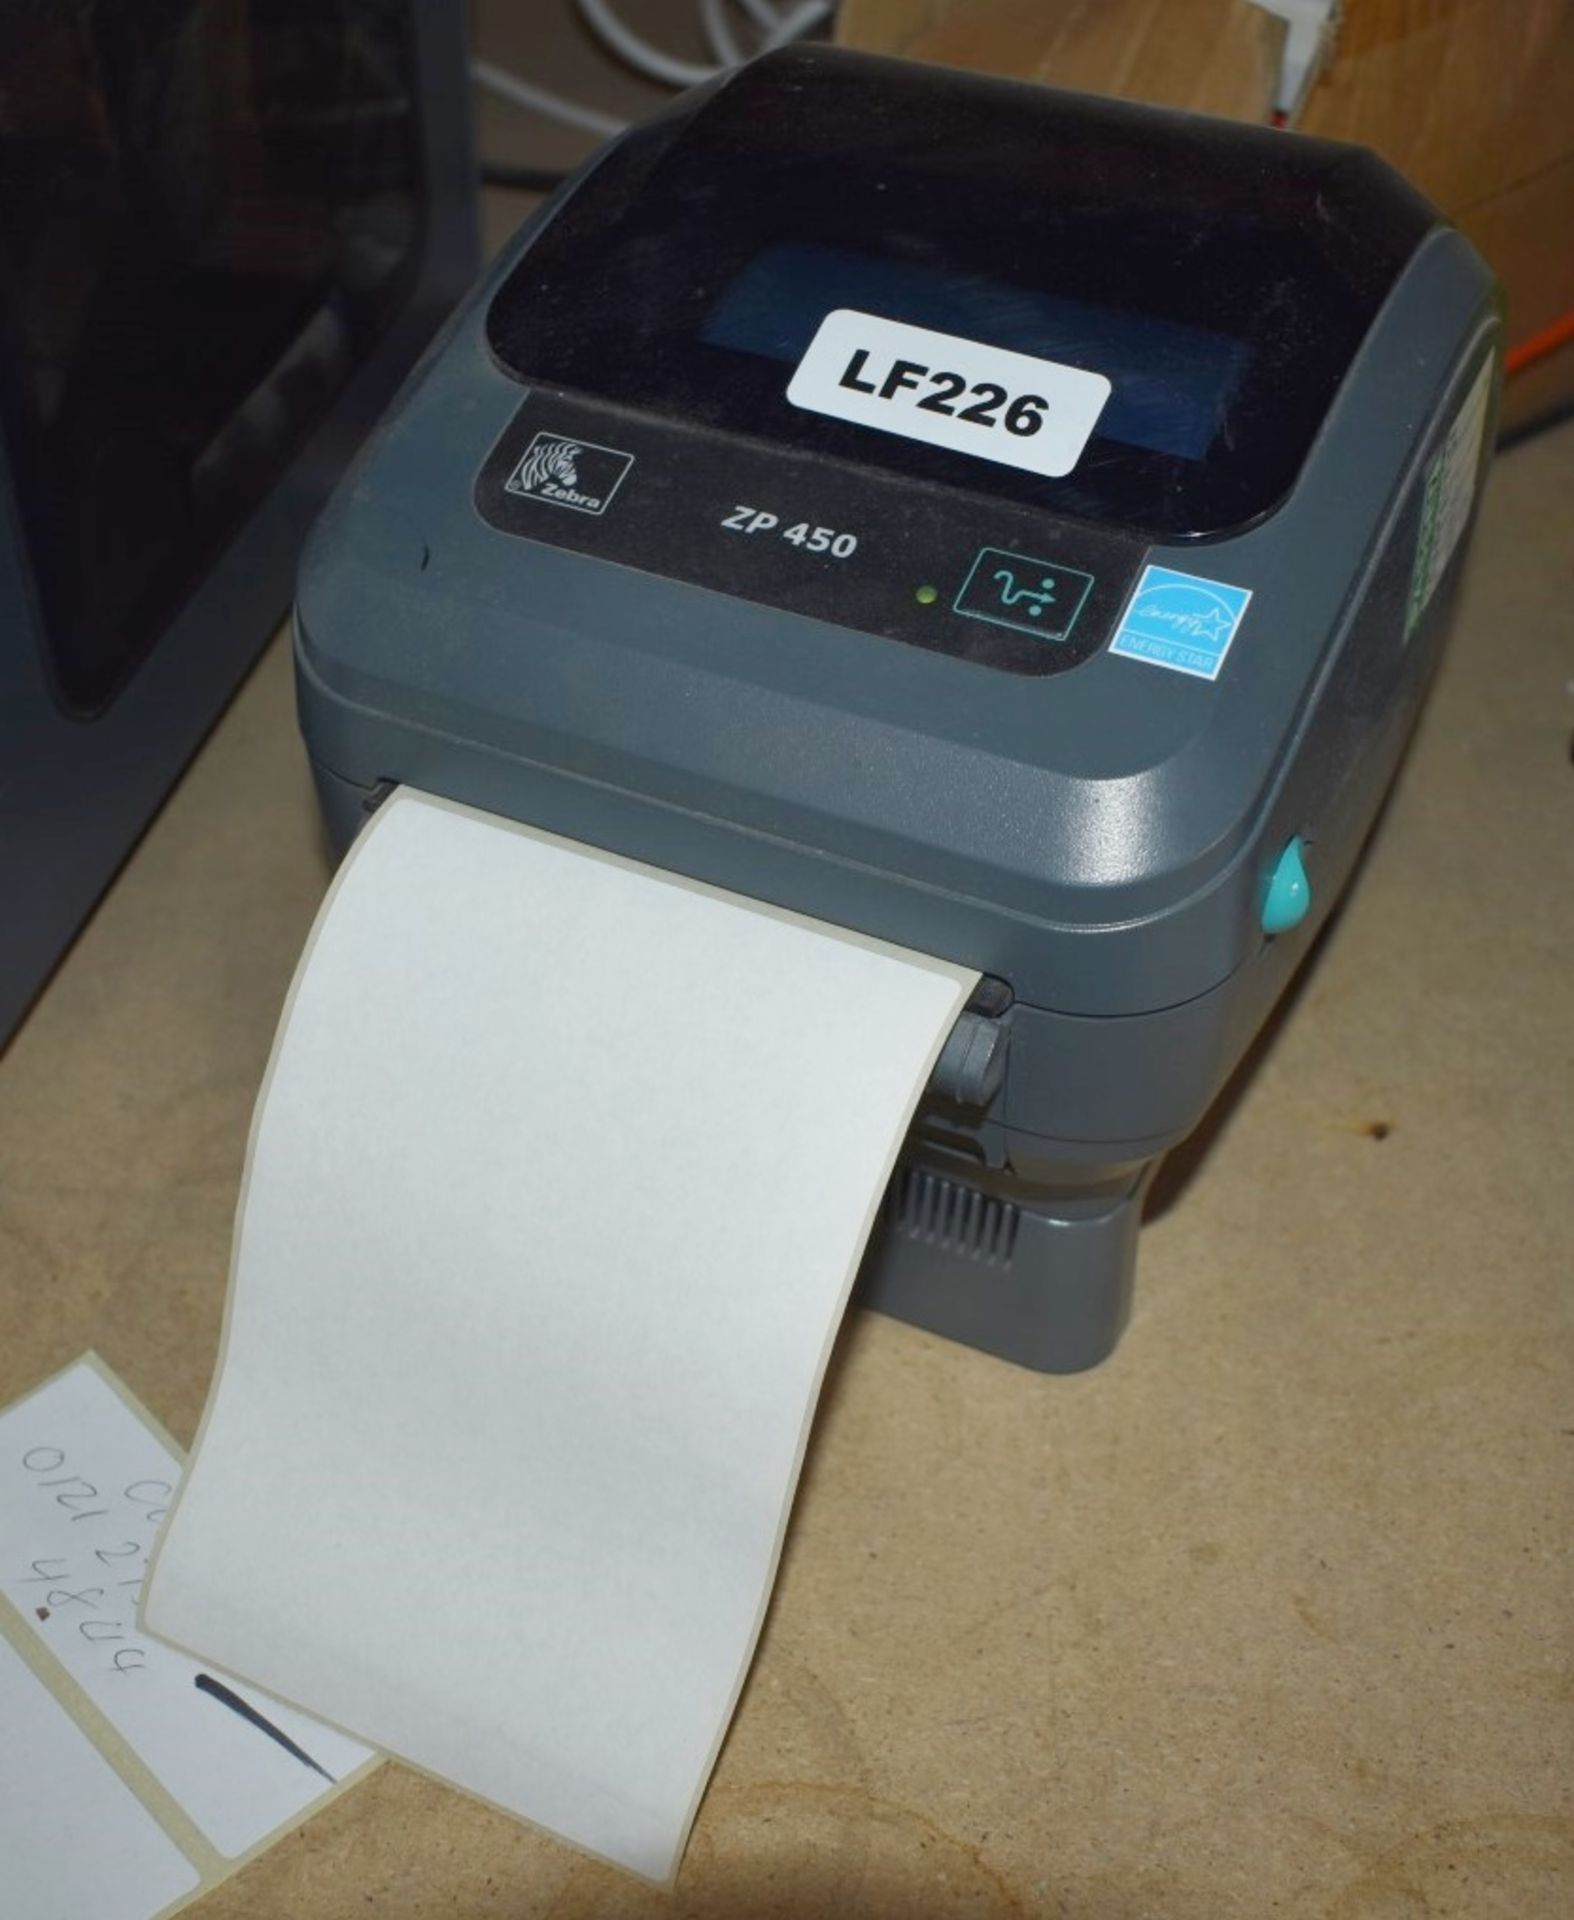 1 x Zebra ZP450 Thermal Laser Printer - Includes Cables - Image 2 of 3